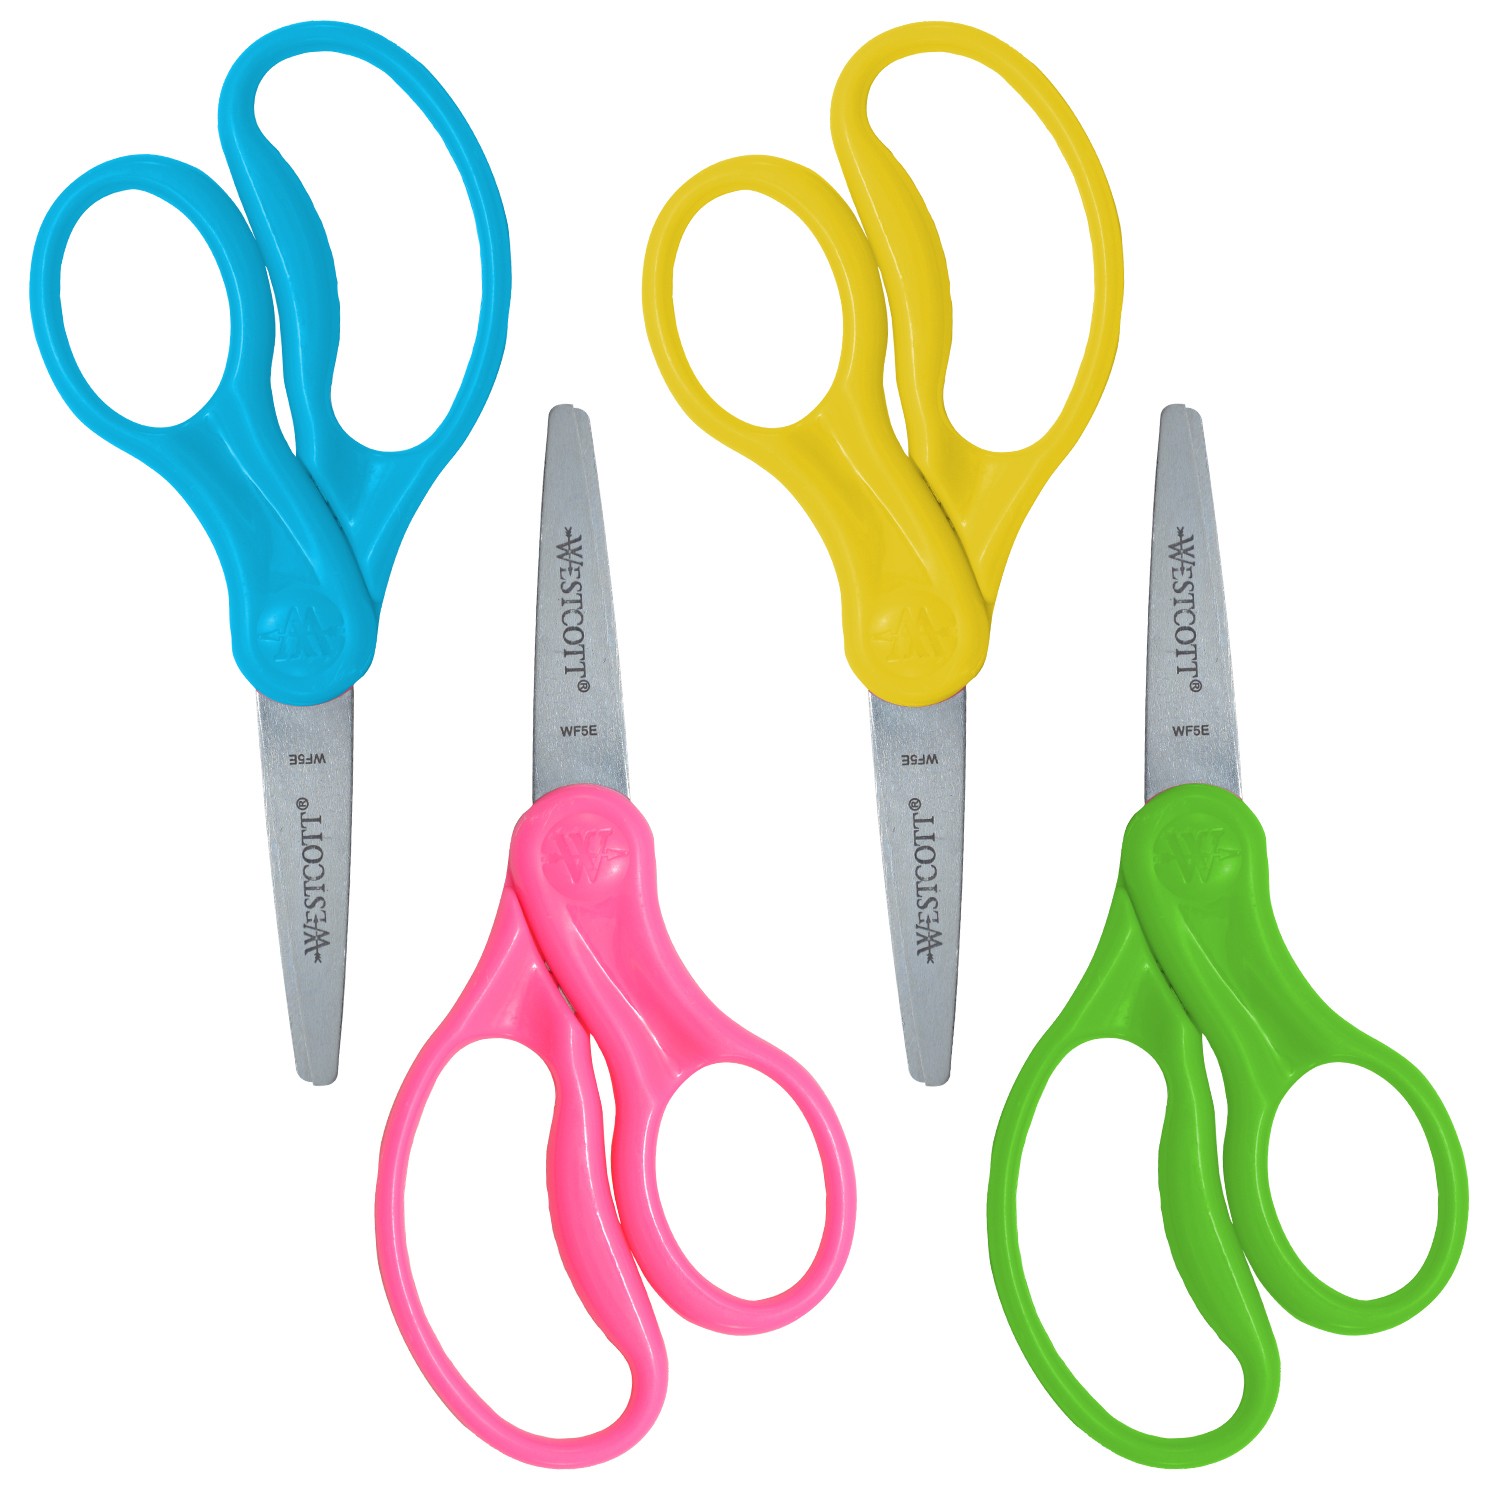 5" Hard Handle Kids Scissors, Pointed, Assorted Colors, Pack of 2